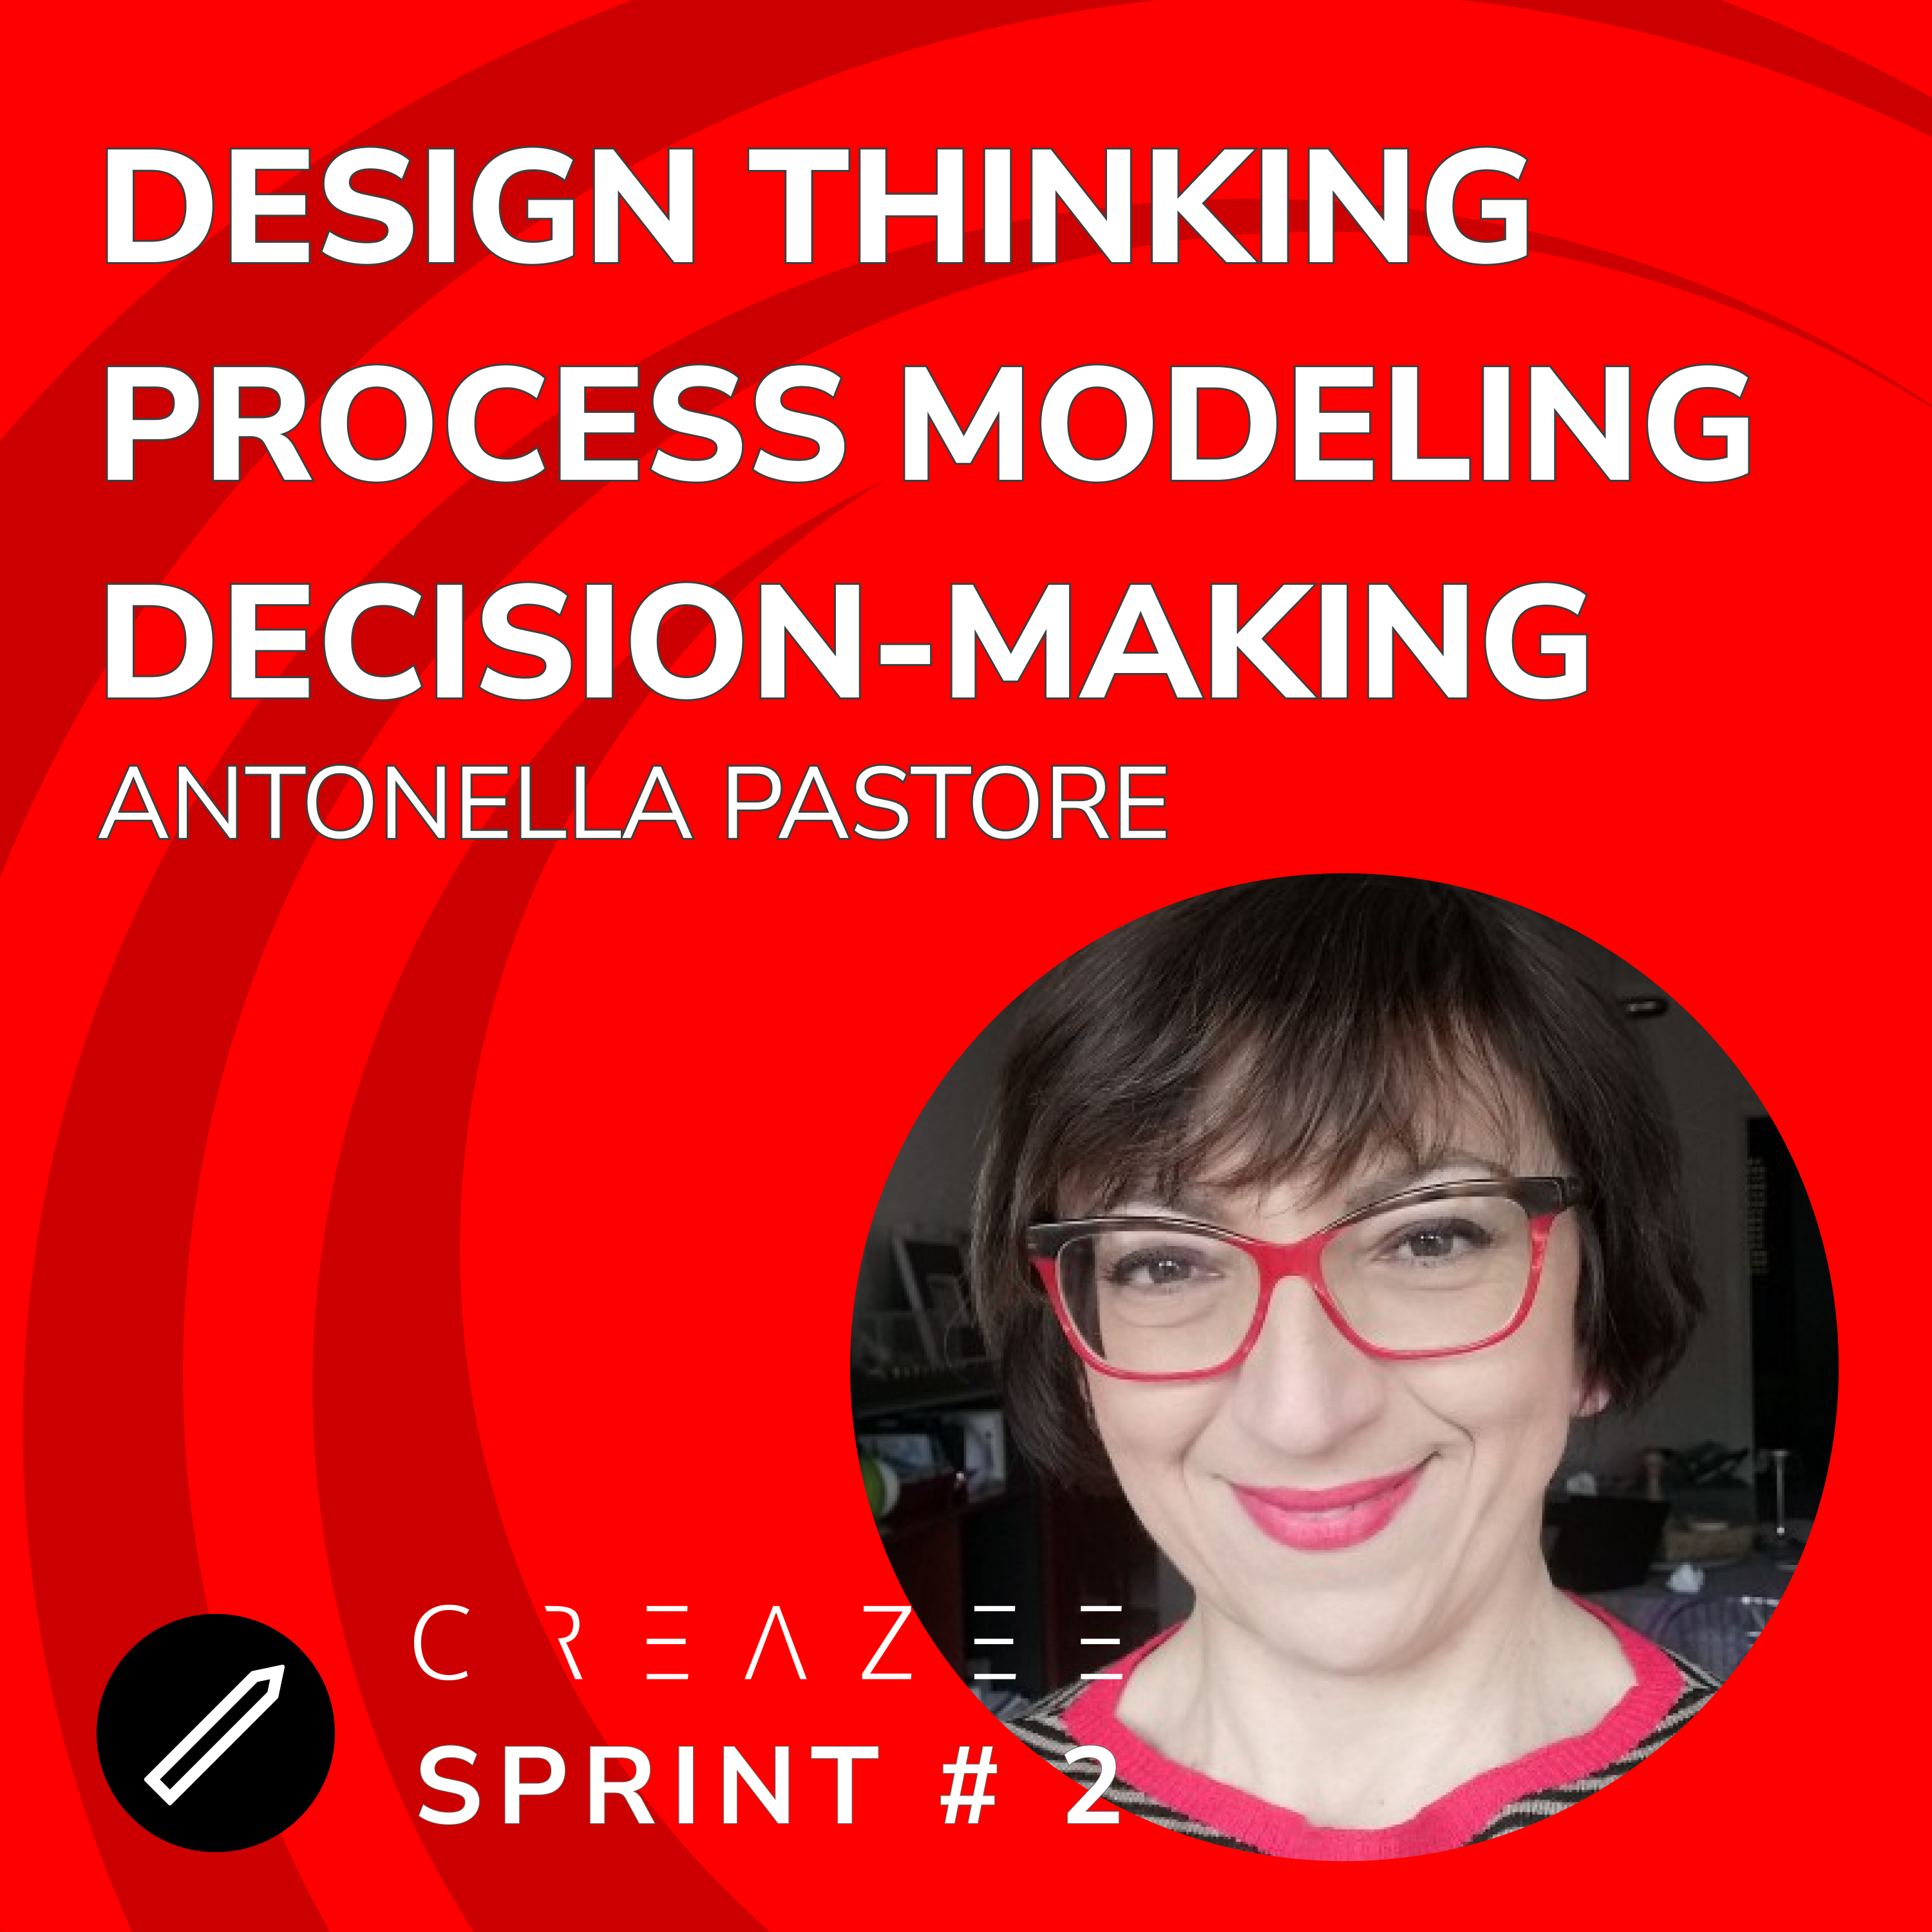 CREAZEE Sprint 2: Antonella Pastore on Design Thinking, Process Modeling, and Decision-Making